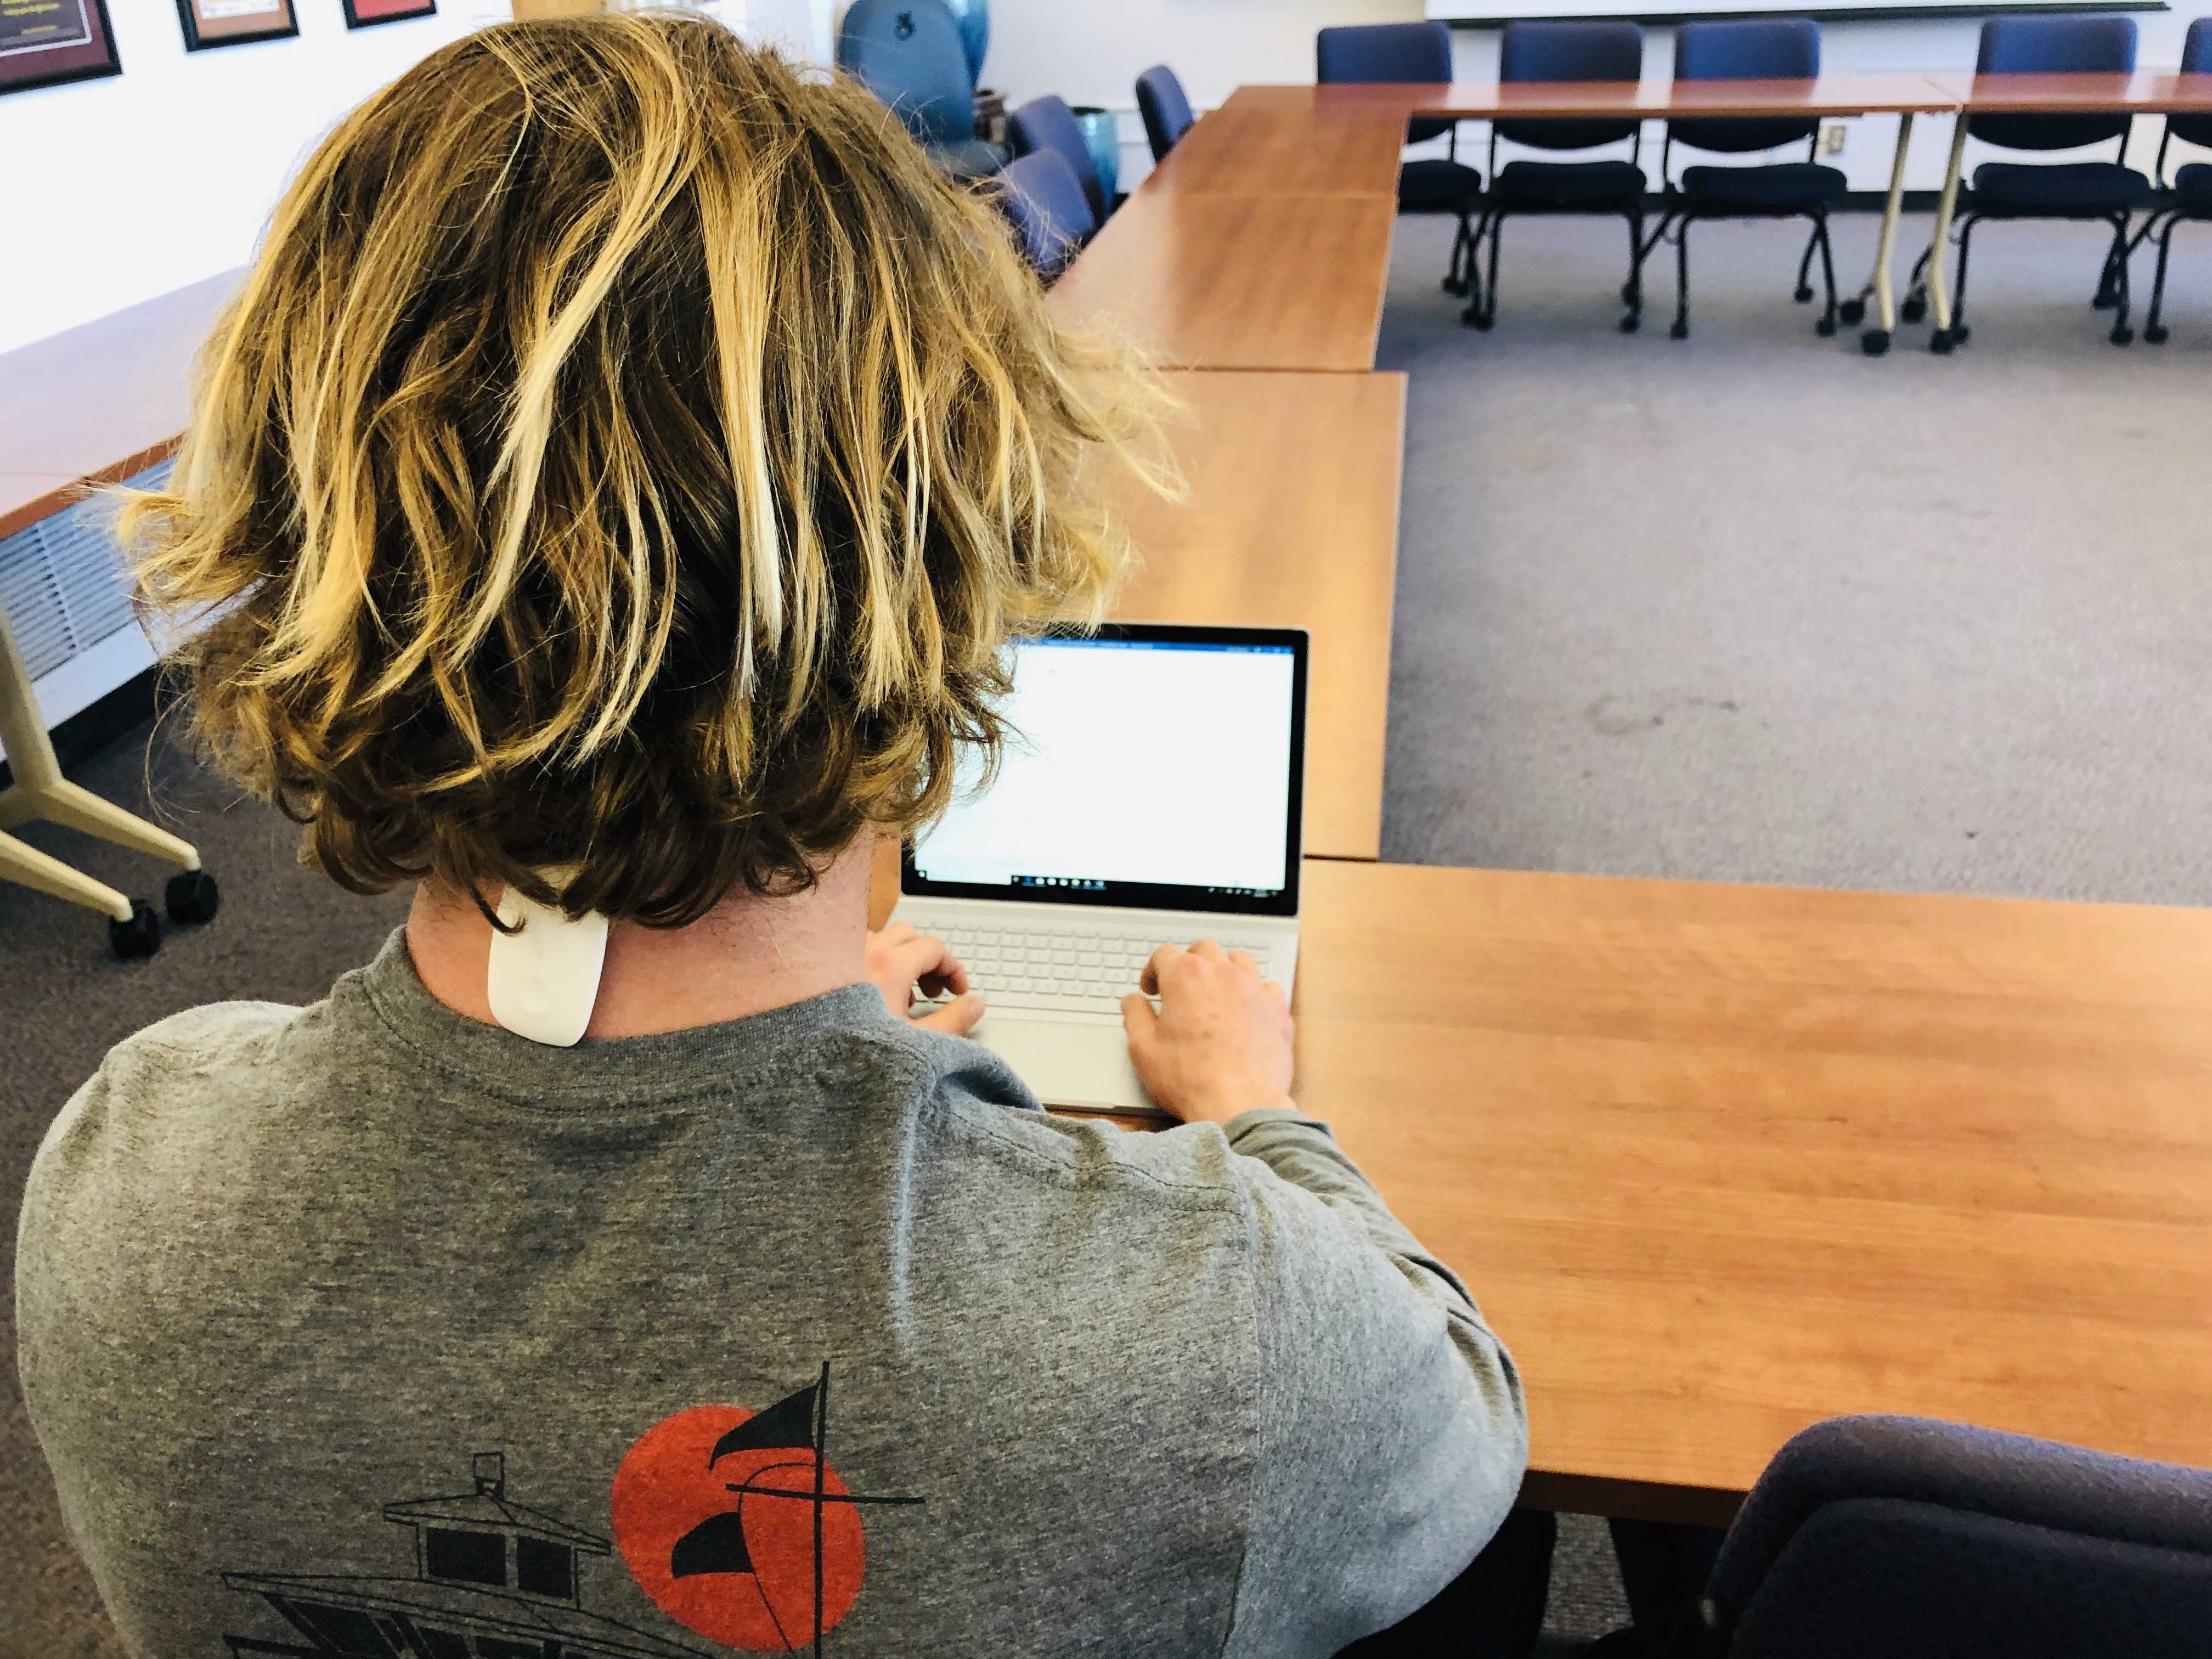 Economics major John Chetwynd wears the Upright GO device to monitor his posture while studying on March 5, 2019. (GEOFFREY SCOTT/ Golden Gate Xpress.)